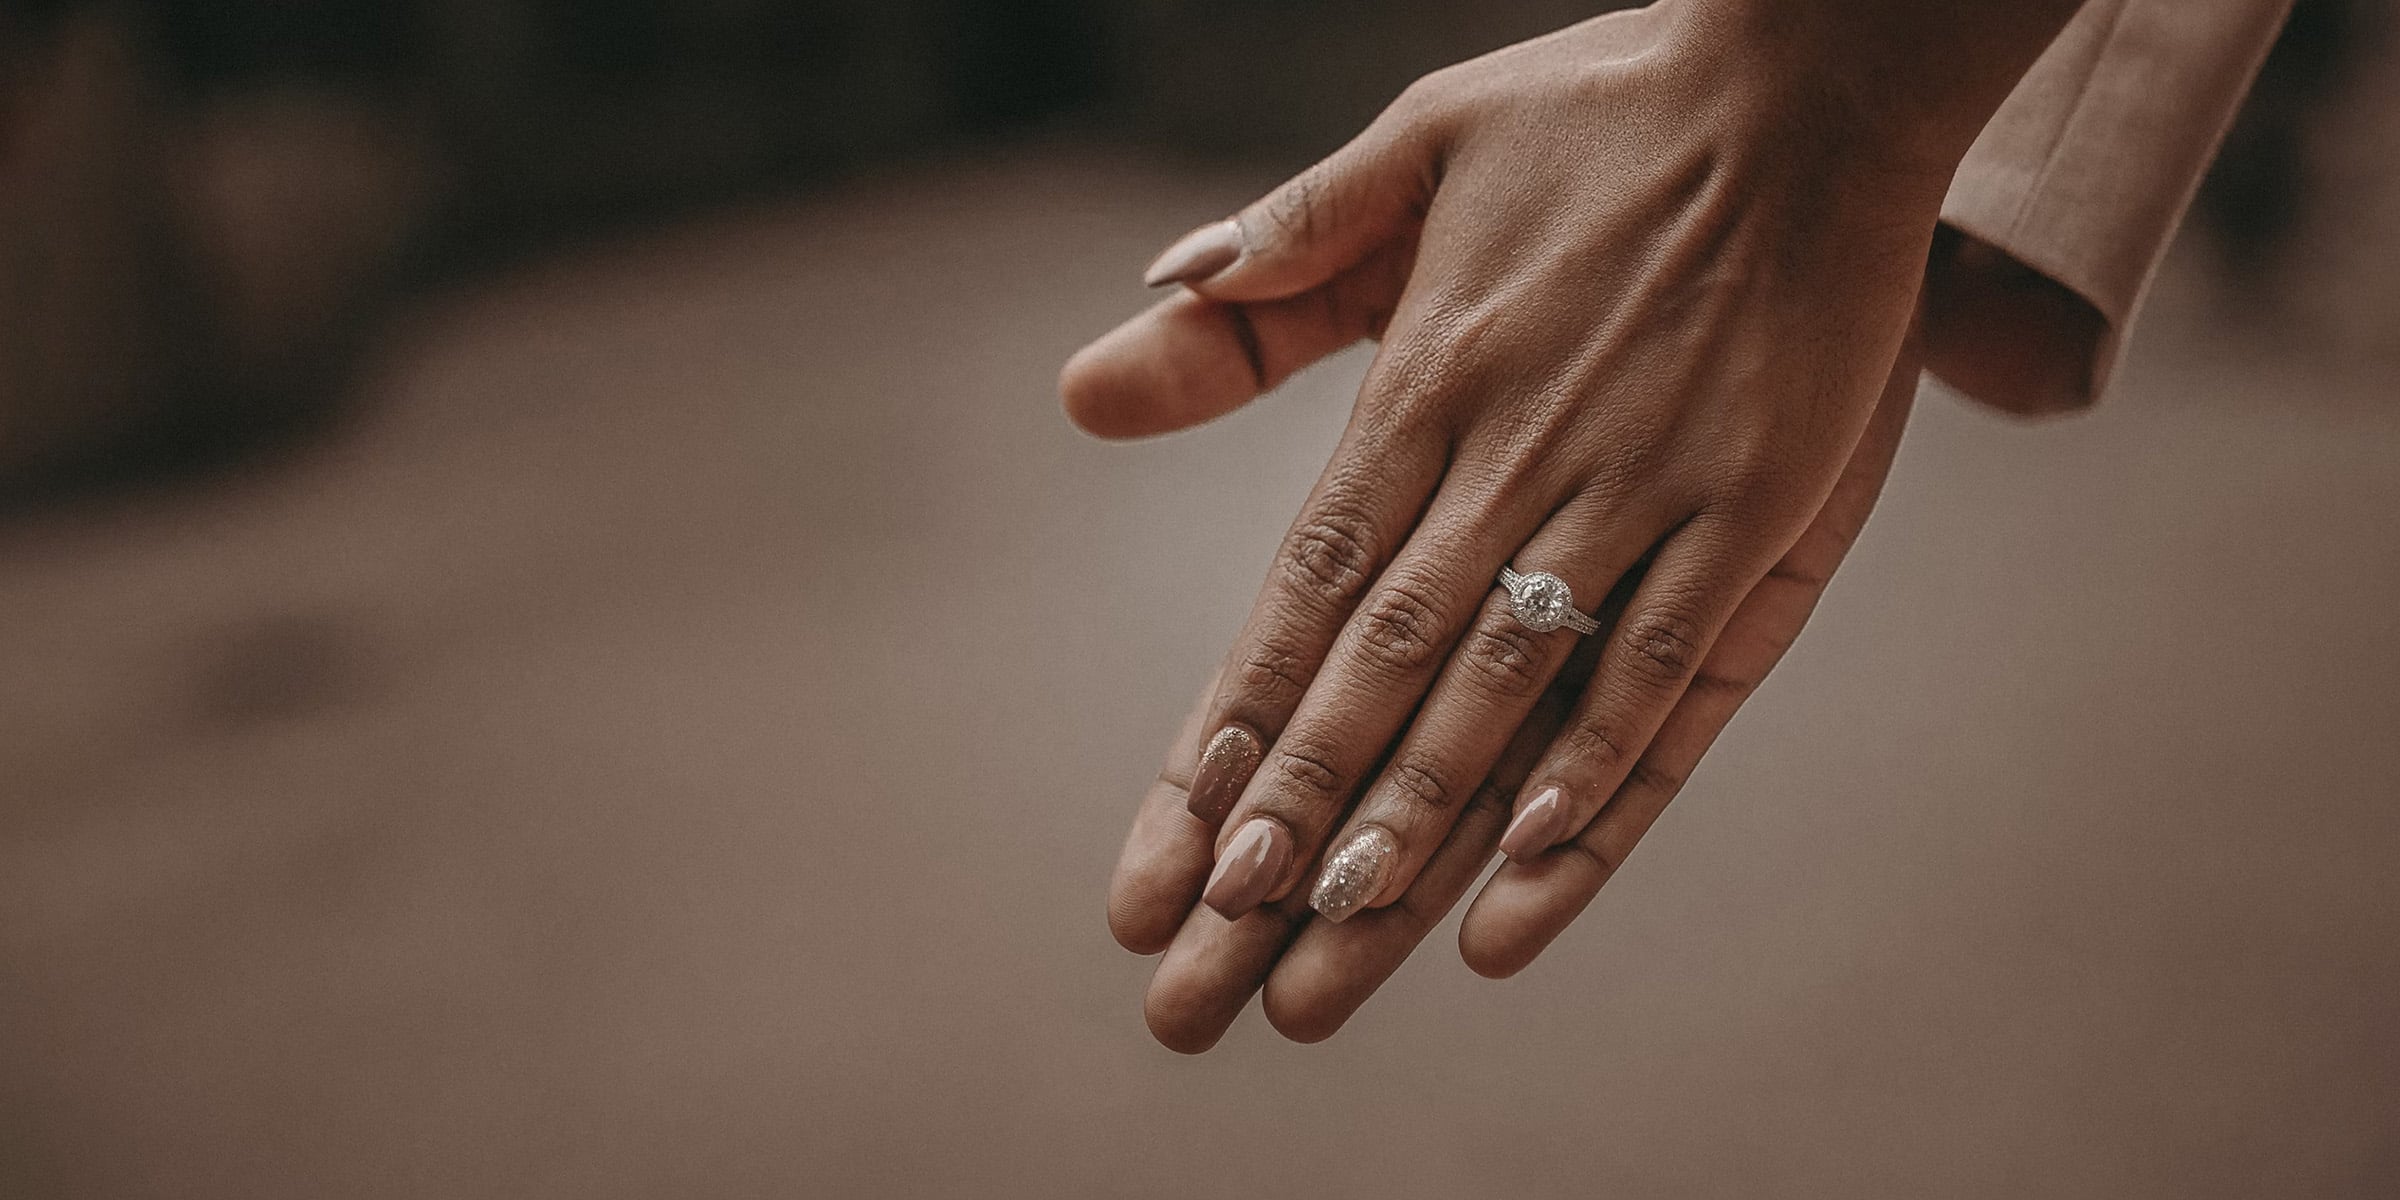 23 Of The Most Expensive Engagement Rings Of All Time